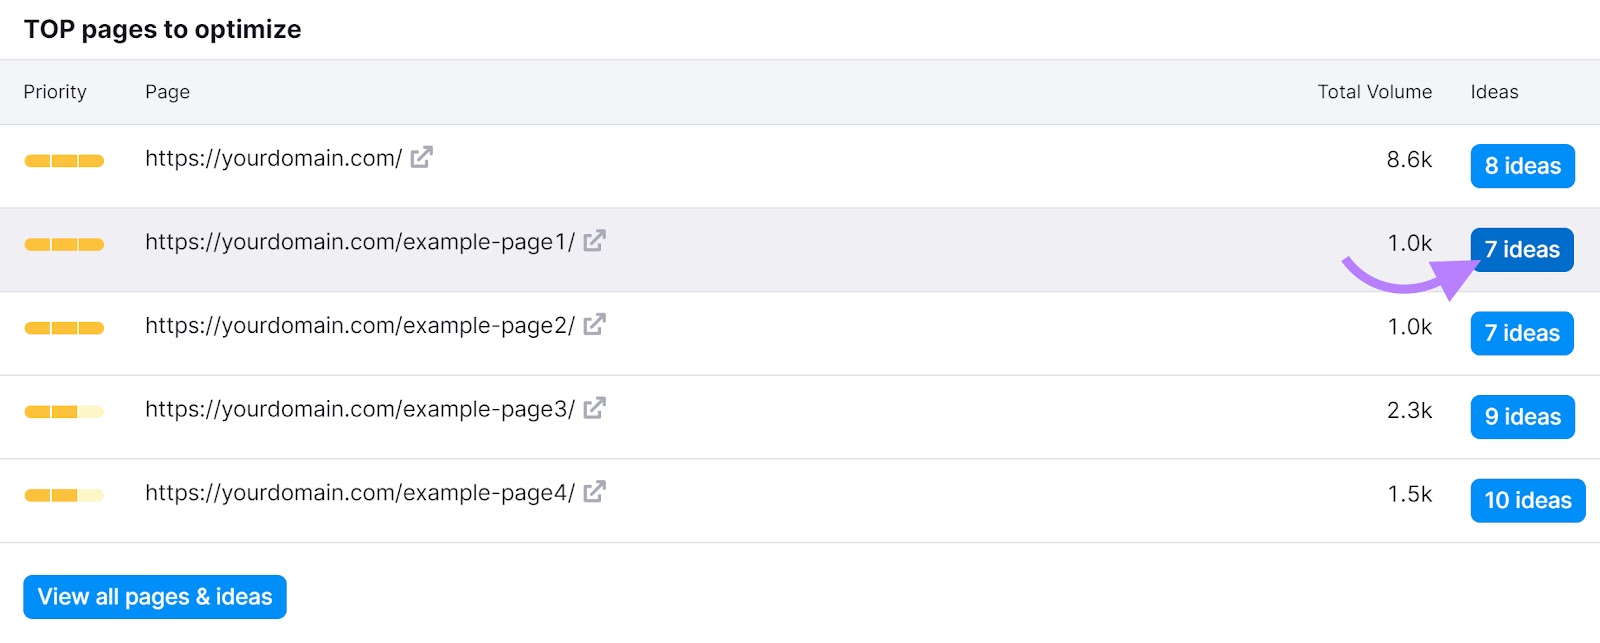 "TOP pages to optimize" section with an arrow pointing to the "x ideas" button.